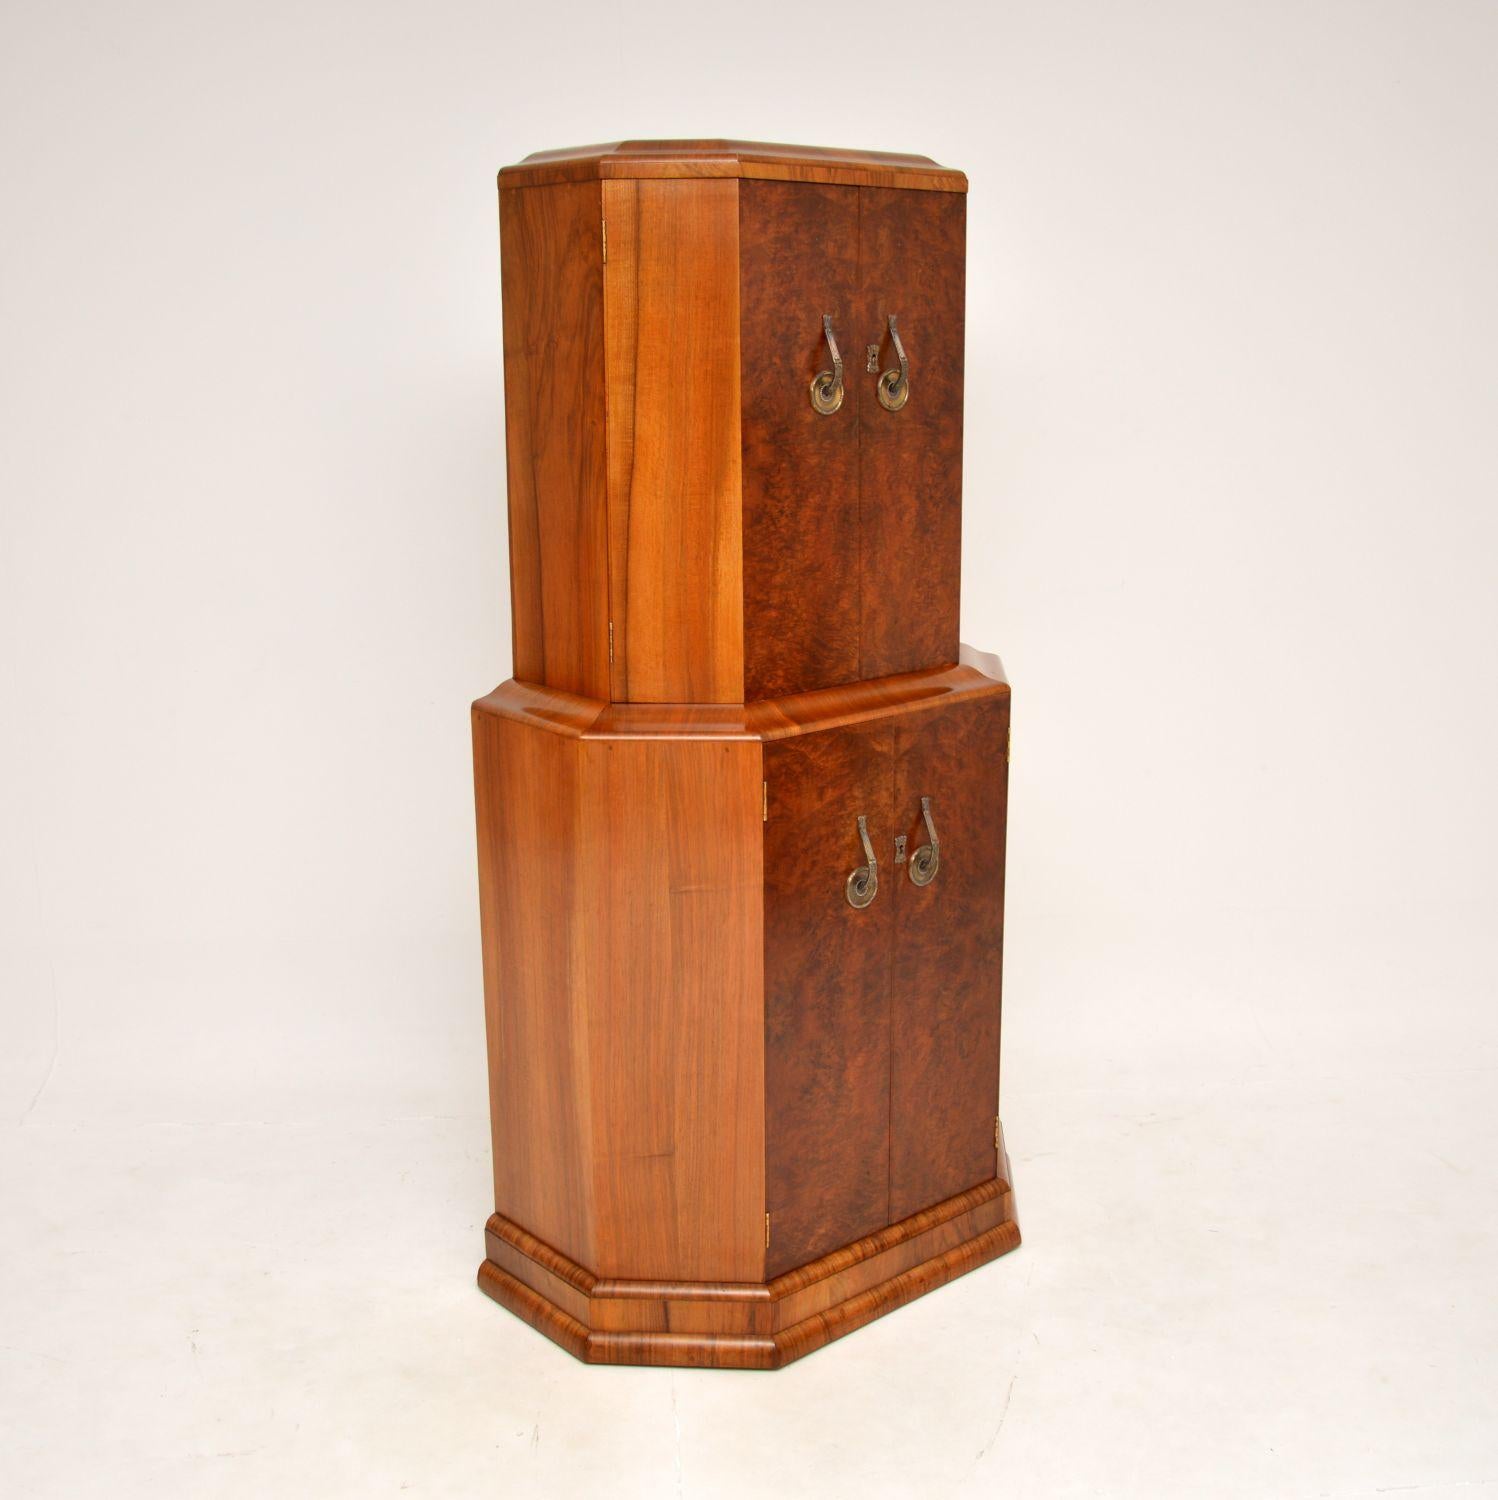 A stunning original Art Deco burr walnut cocktail cabinet. This was made in England, it dates from the 1920-30’s.

It is beautifully designed and is of superb quality. The proportions are lovely, this is a very useful size and has some great